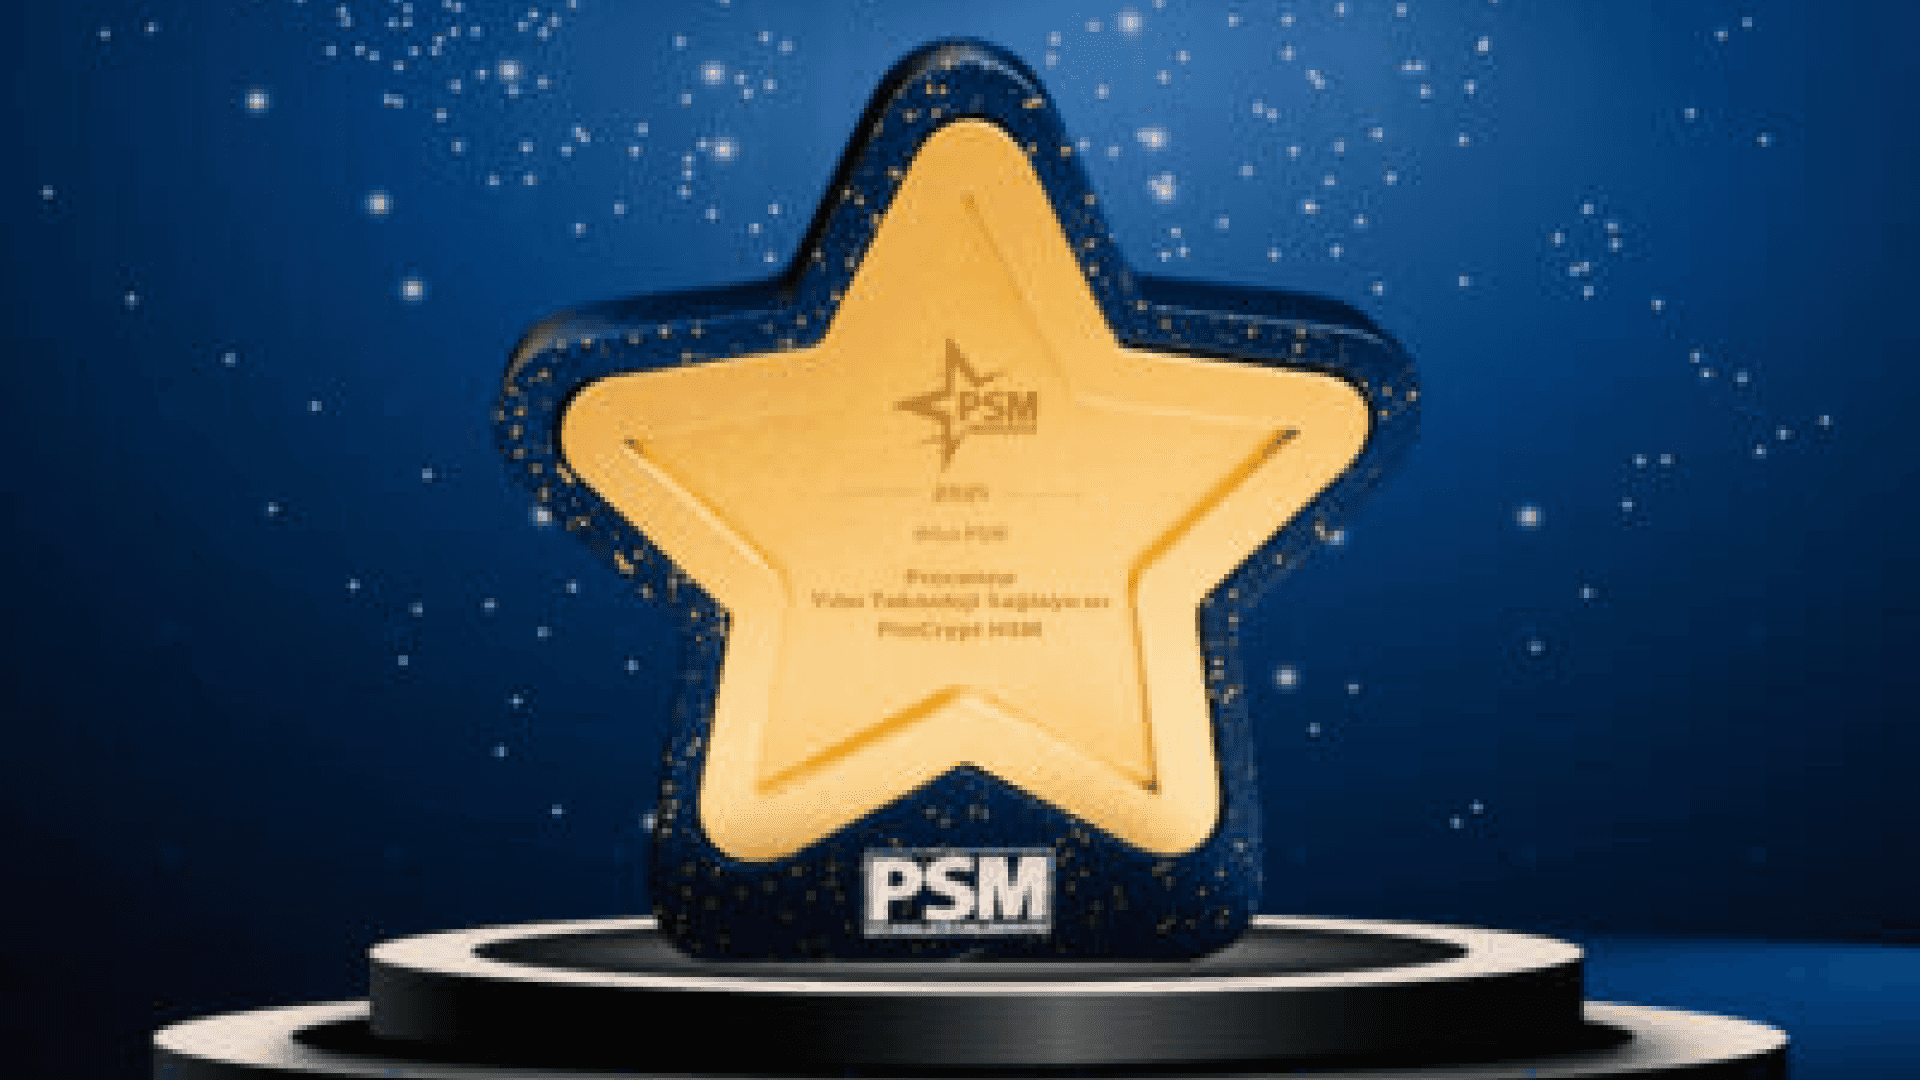 ProCrypt HSM Crowned with a Golden PSM Award!